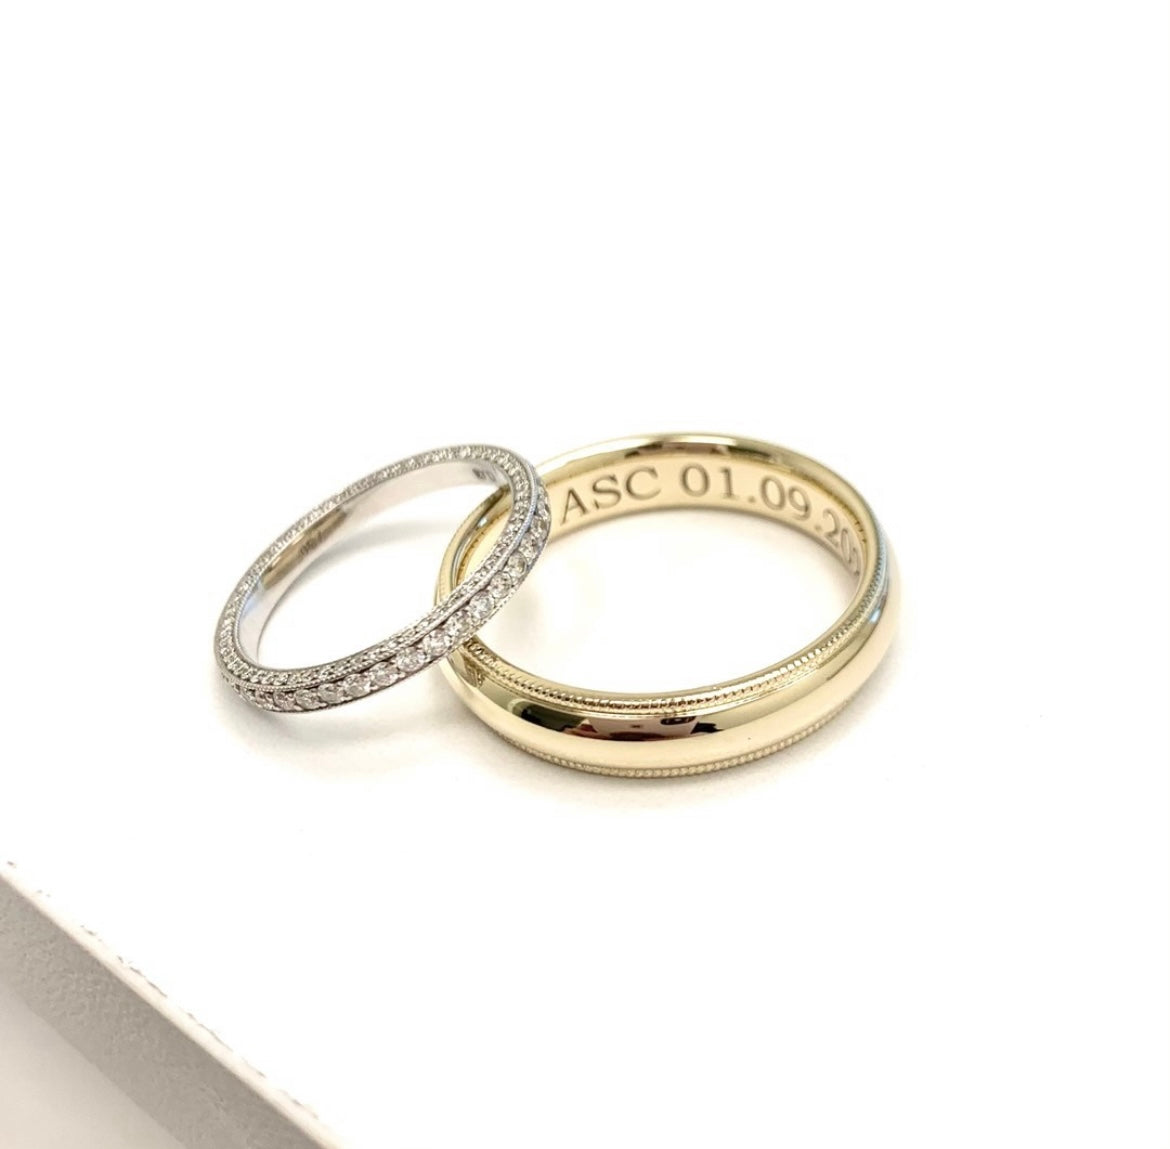 Wedding rings in white gold and yellow gold